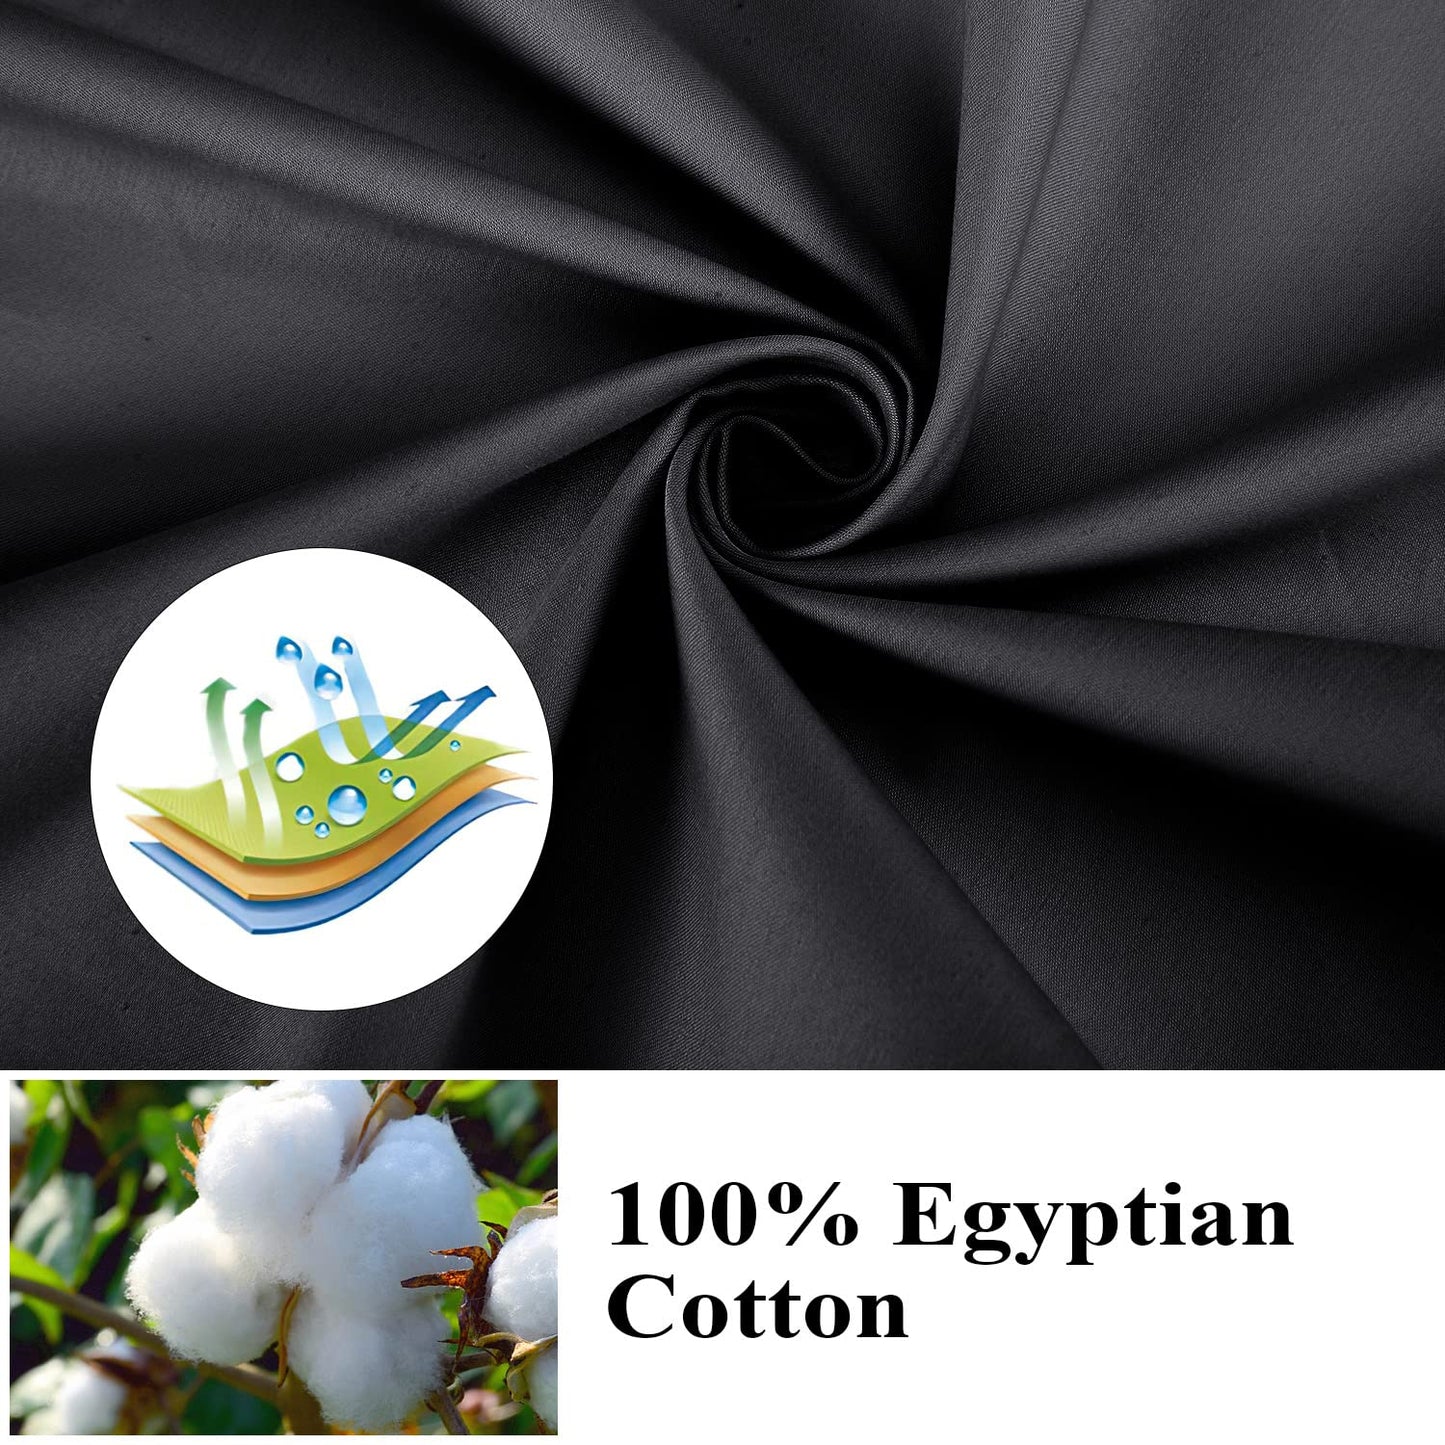 Twin Size Fitted Sheet Only Black, 100% Egyptian Cotton 600 Thread Count, 16" Deep Pocket Premium Cotton Mattress Sheet (1 Bottom Sheet Only)